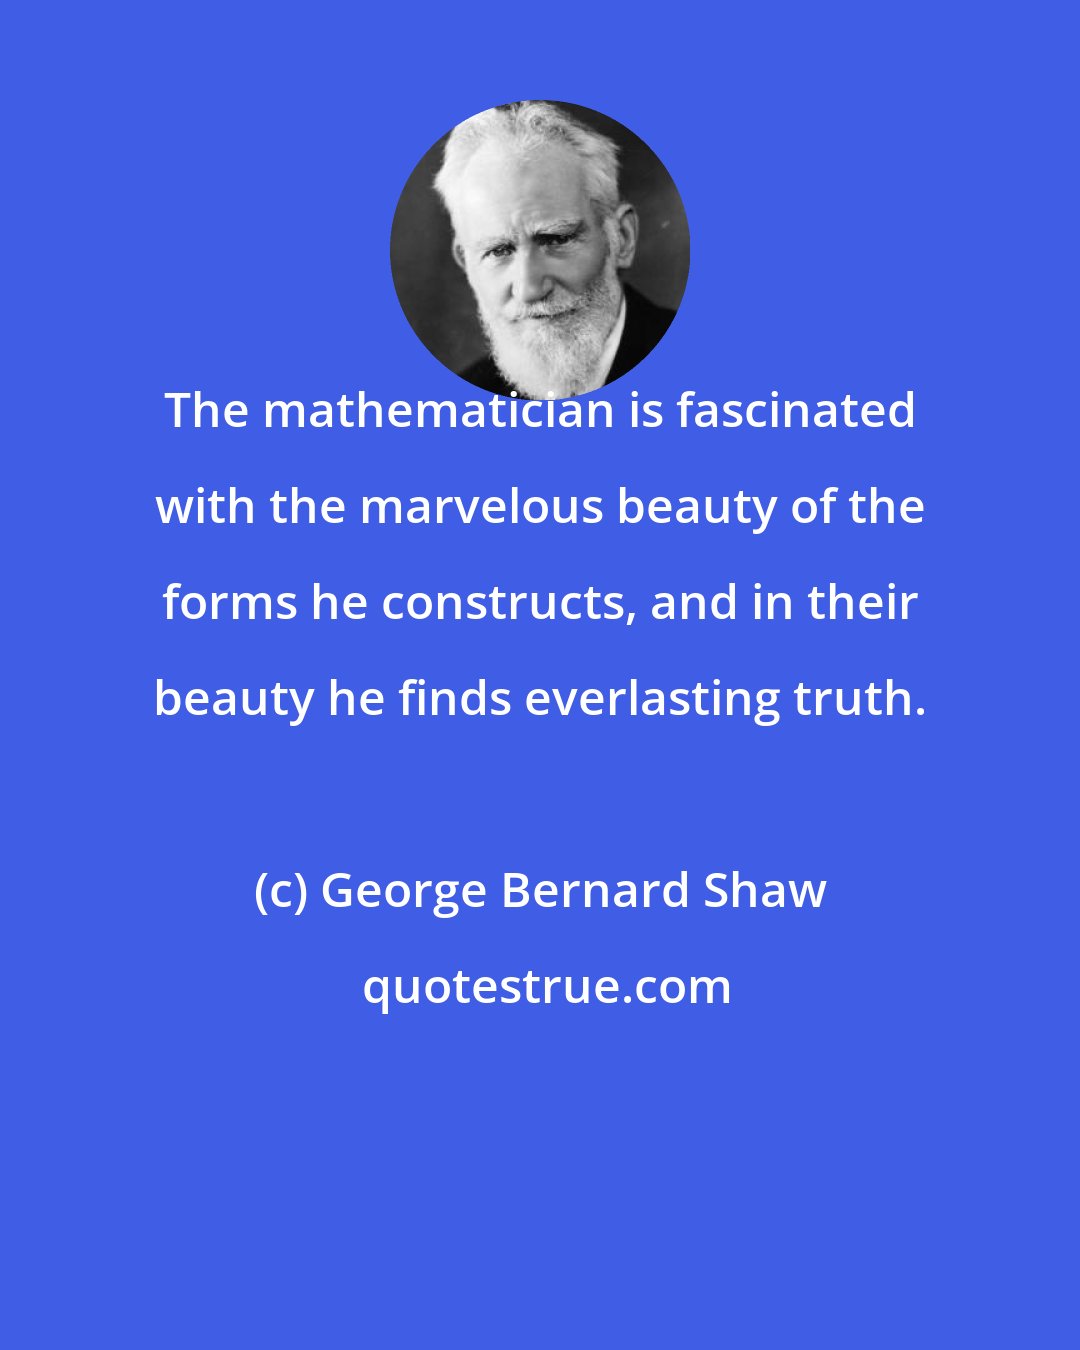 George Bernard Shaw: The mathematician is fascinated with the marvelous beauty of the forms he constructs, and in their beauty he finds everlasting truth.